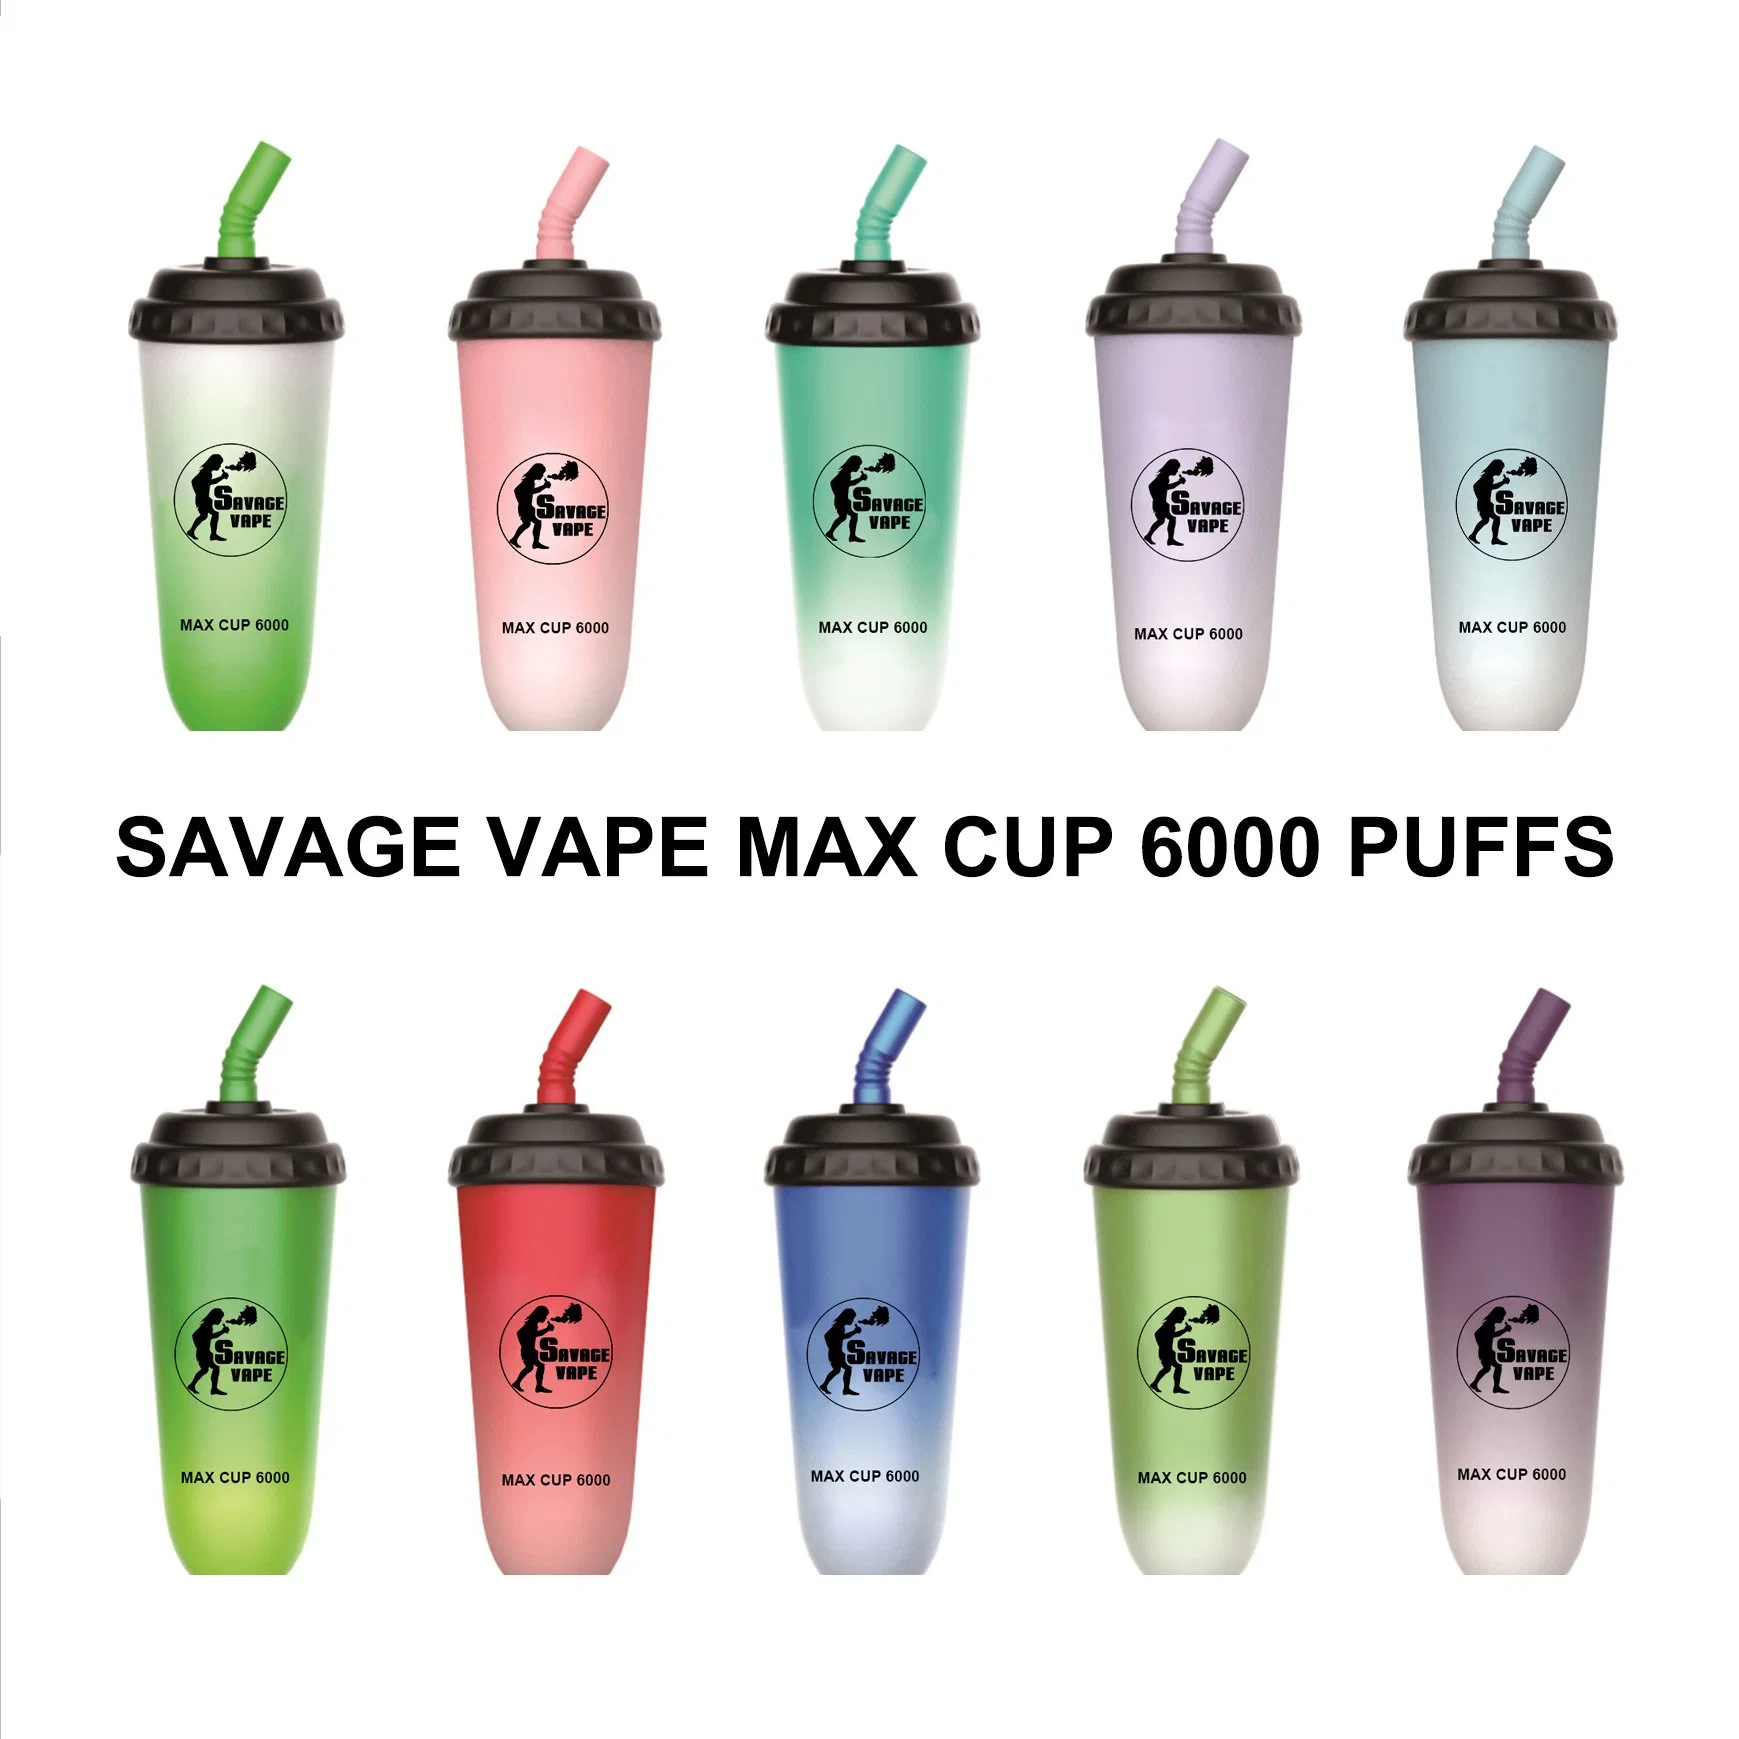 Original E cigarette jetable Vape Pen Randm Vapes jetable Puff Savage Max Cup 6000 Puffs rechargeable 16 ml Zooy PRO 5000 Hits 2% 5% couche Desechable Elfba